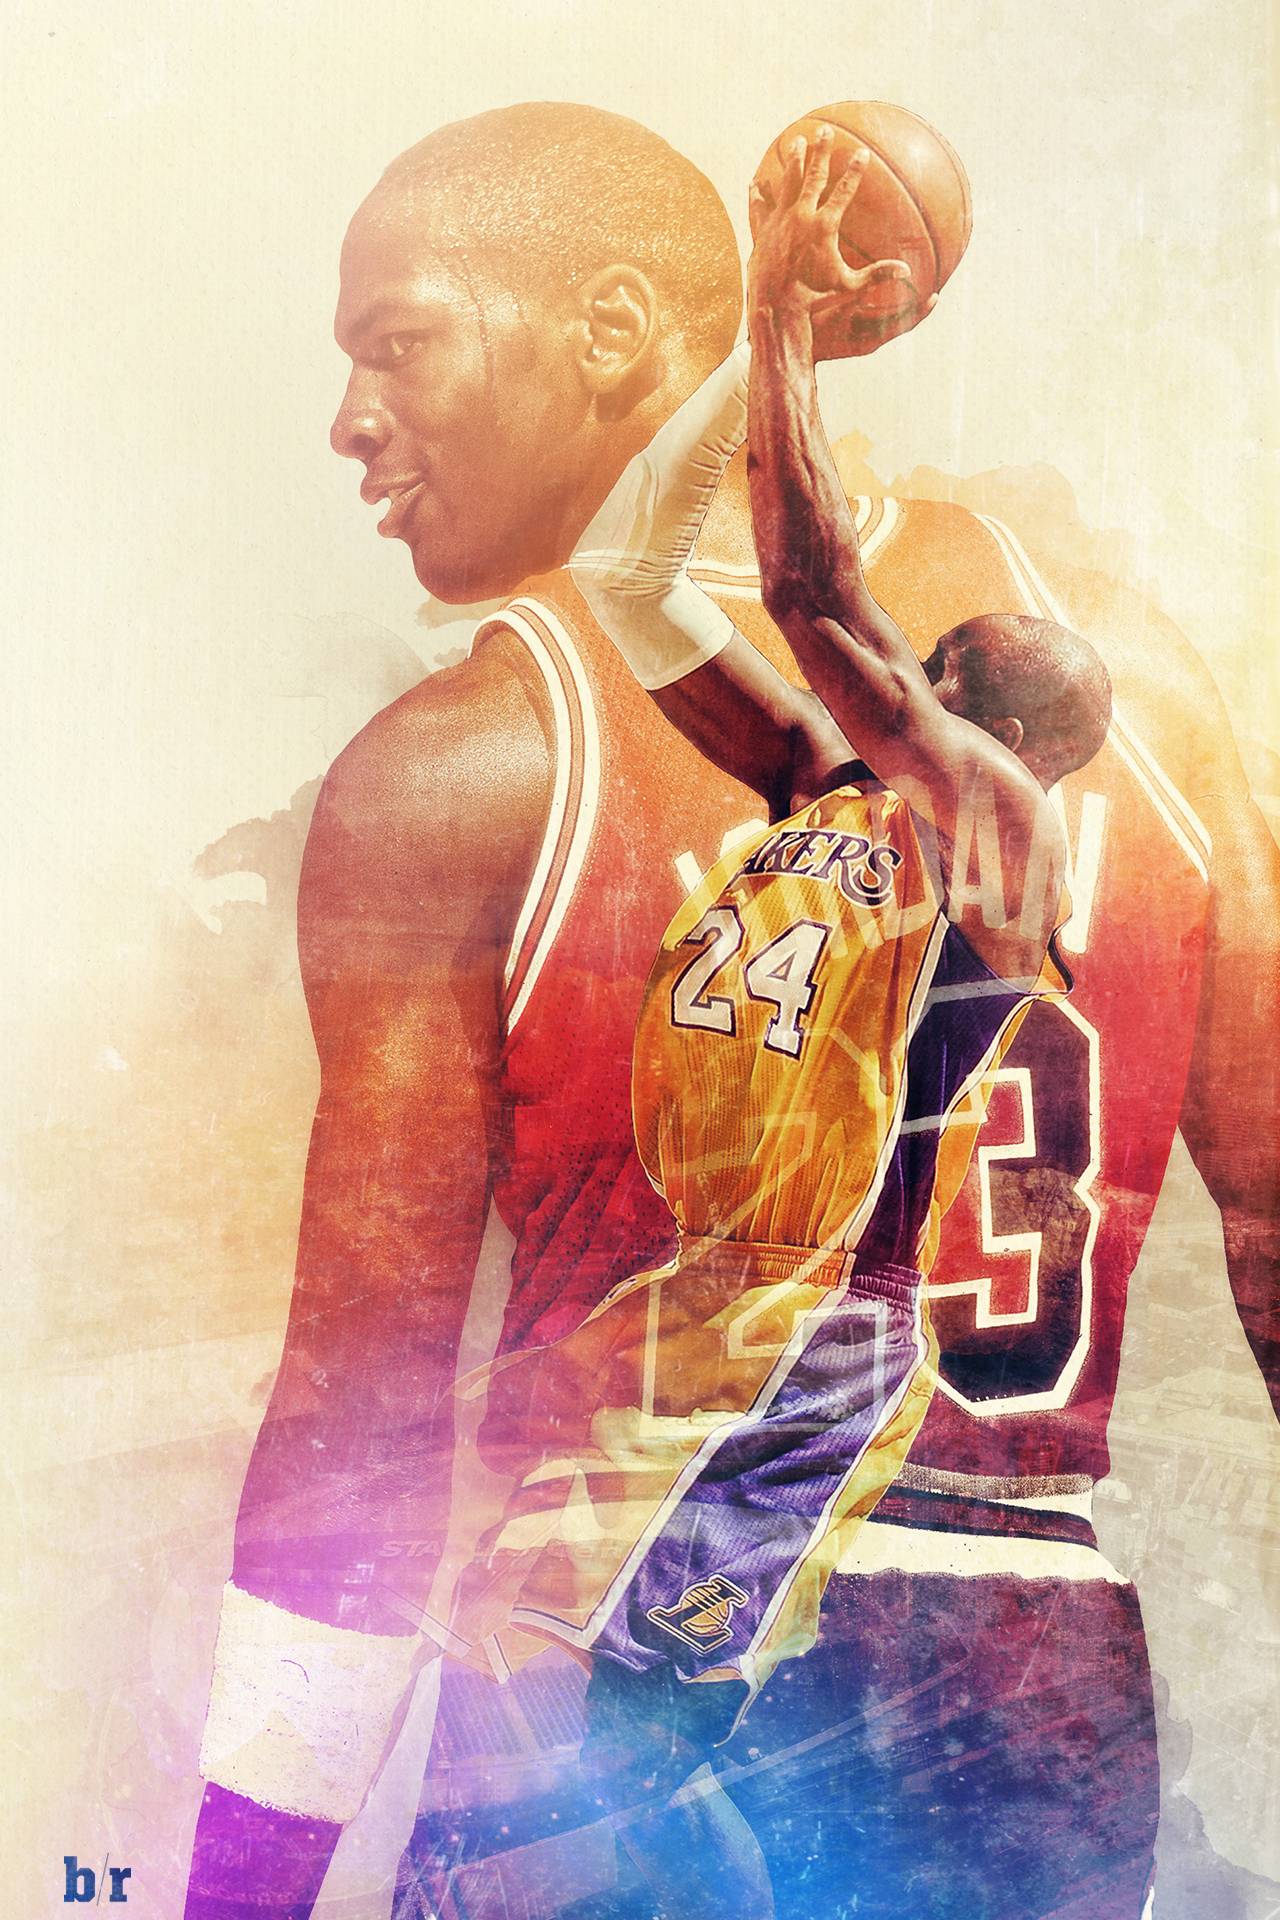 Bleacher Report posted a mirror image of Kobe and Jordan